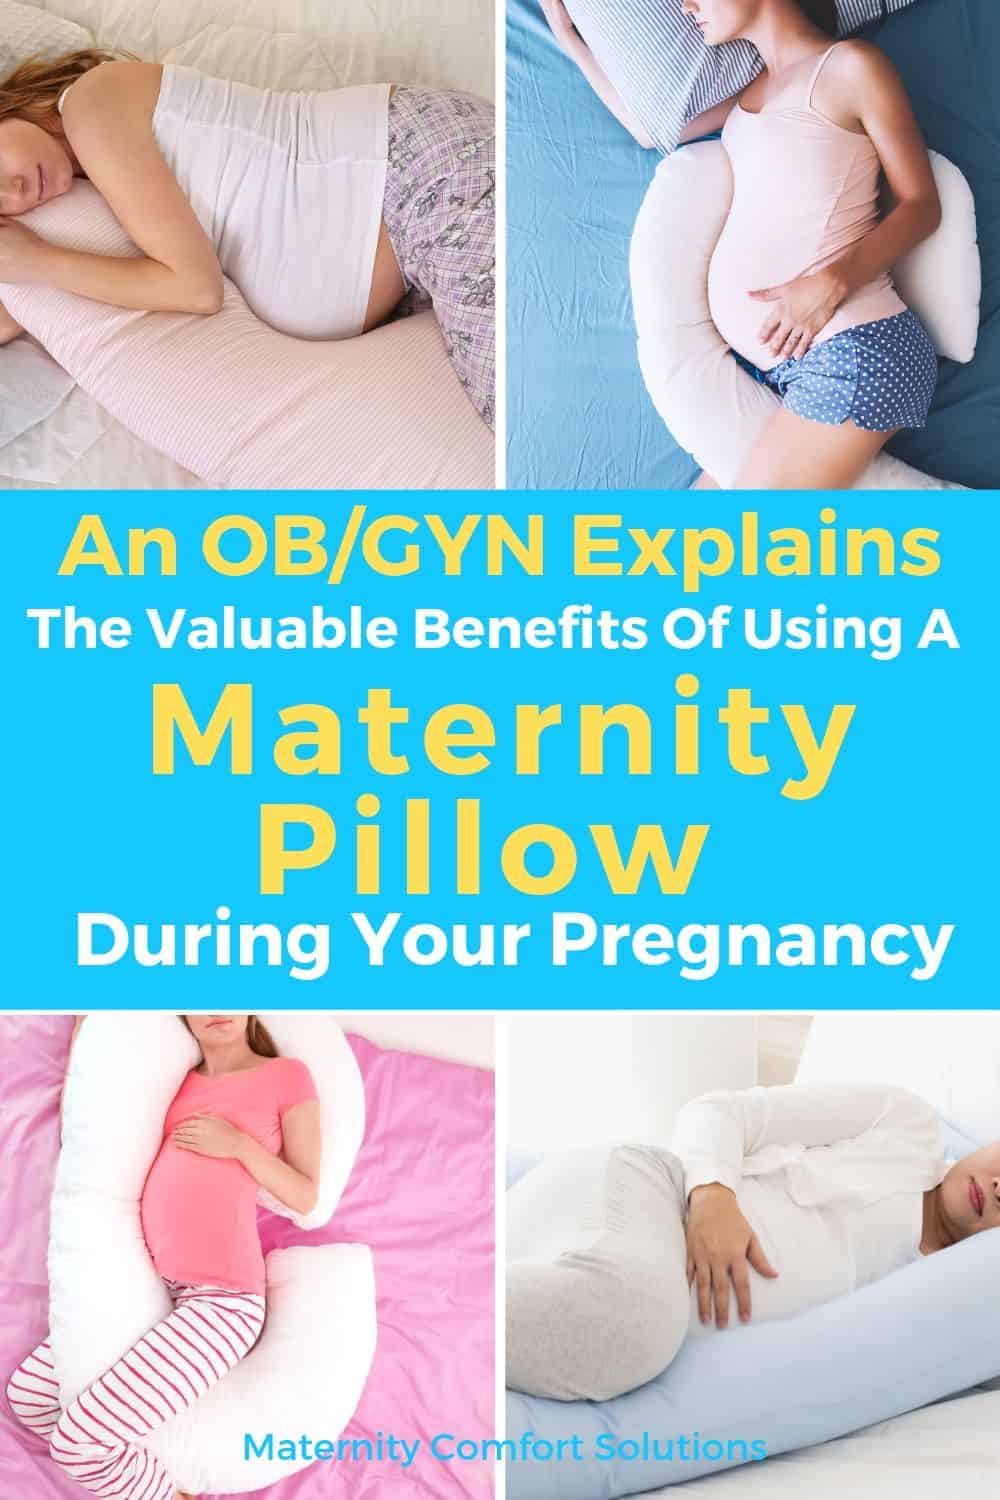 Benefits of using a Pregnancy Pillow